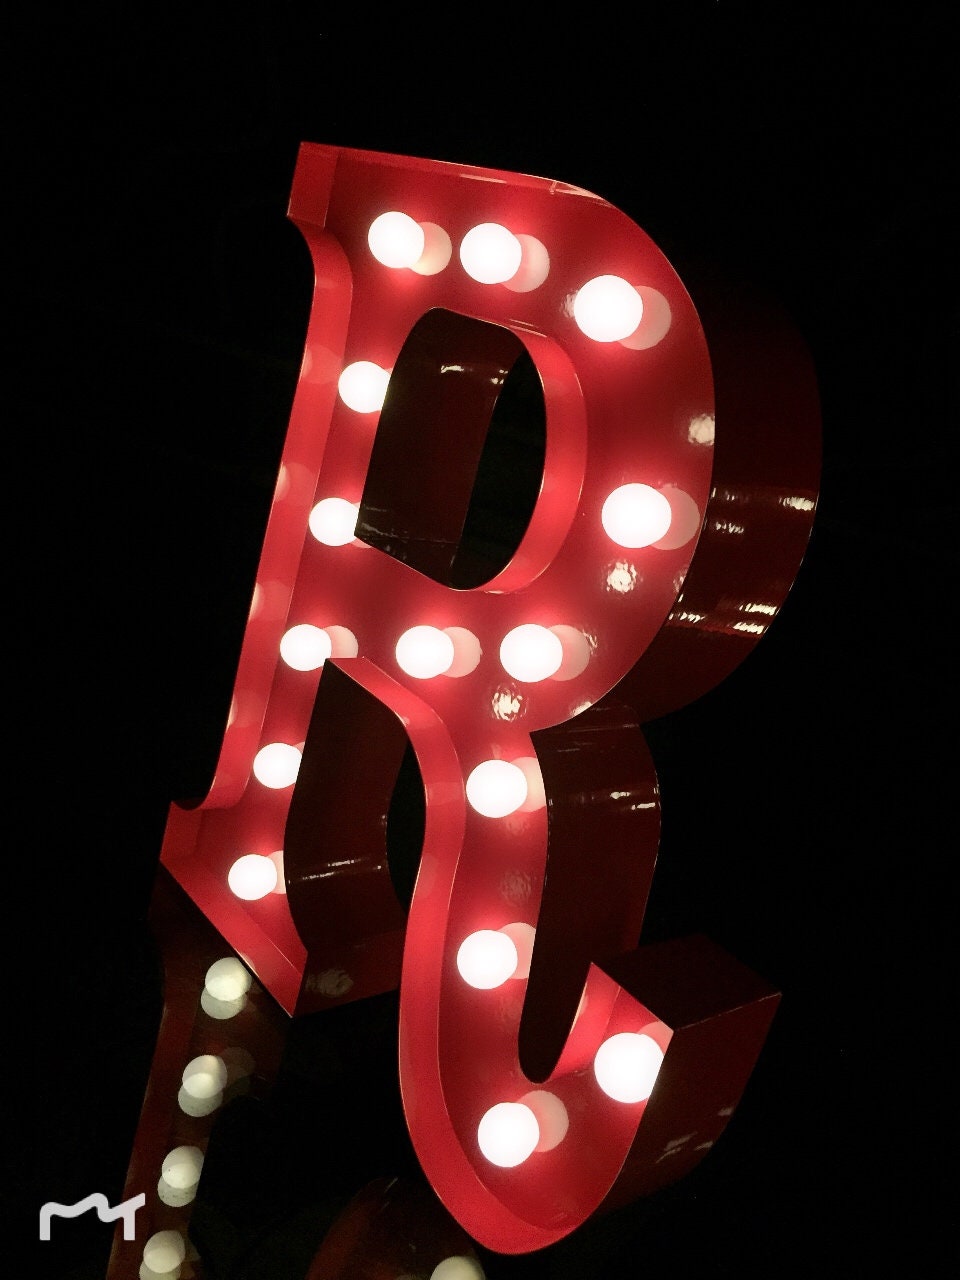 ROT 31x22x5cm=12 INCH MARQUEE LETTER LIGHTS LED ALPHABET METALL ZAHL 4 